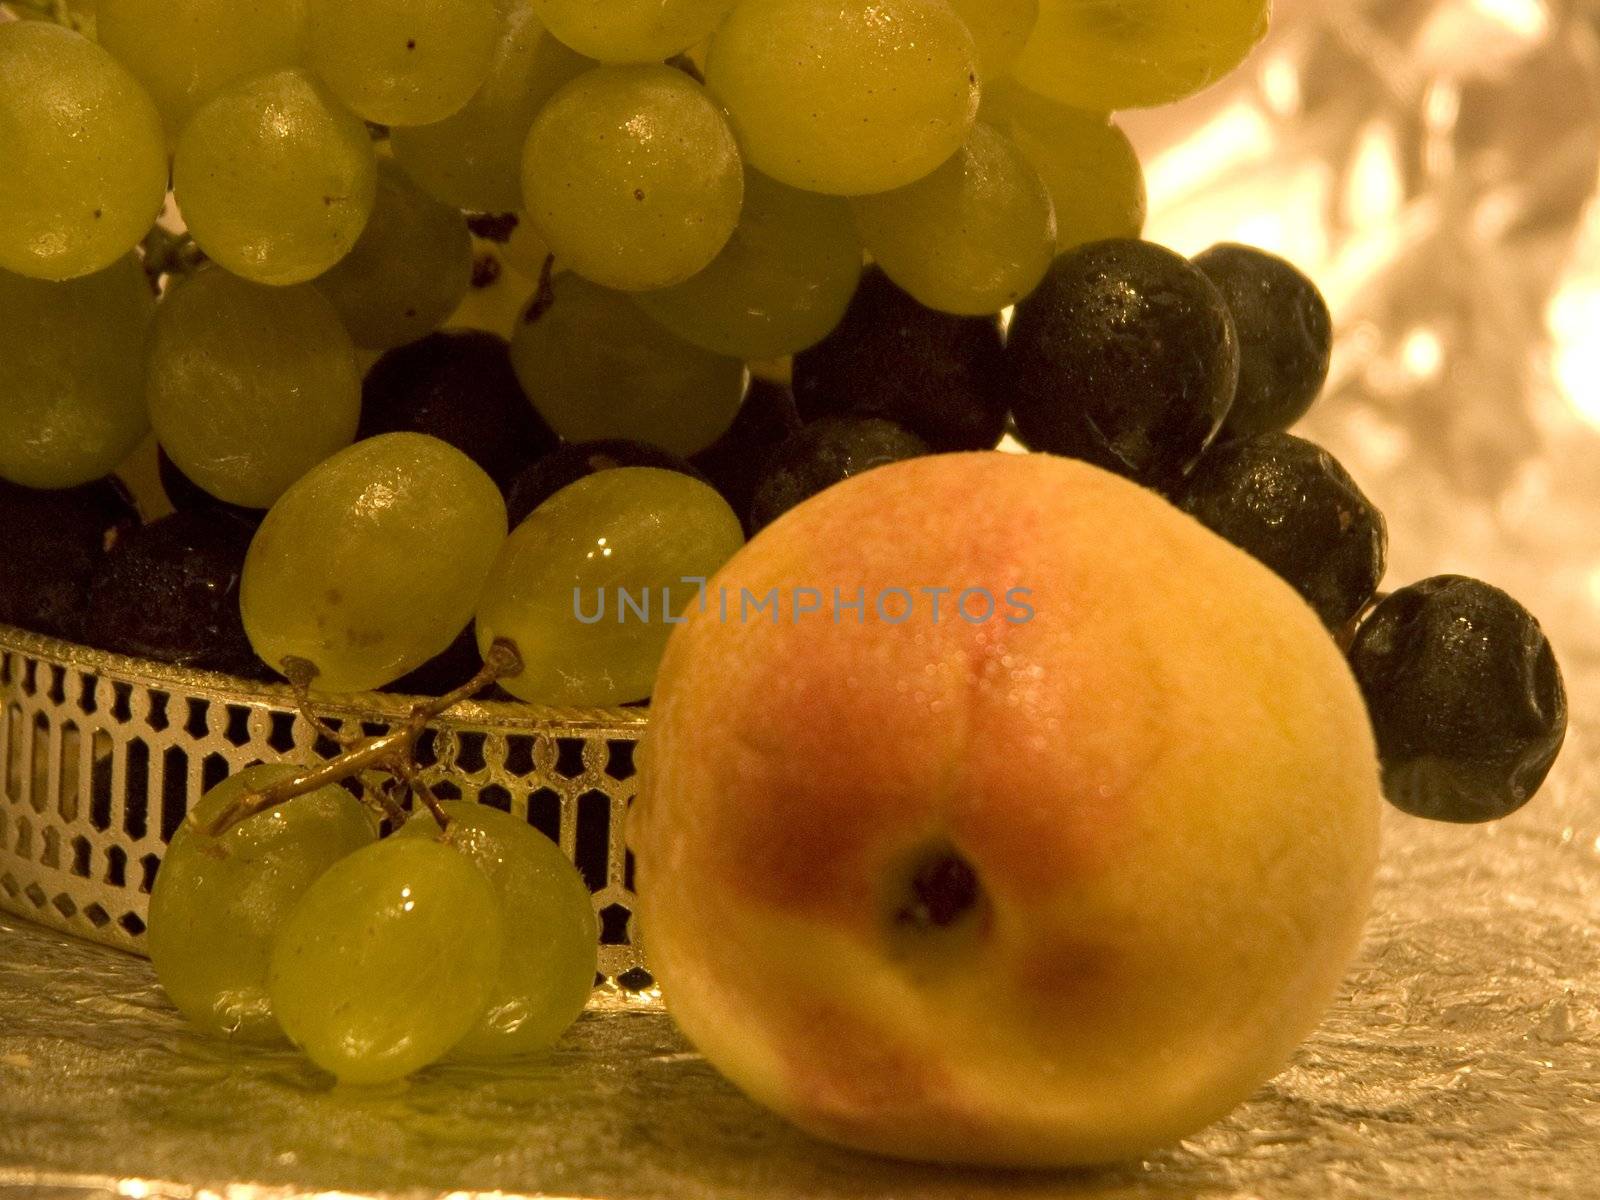 Two kinds of grapes in a silver bowl and a peach in the foreground in golden light
